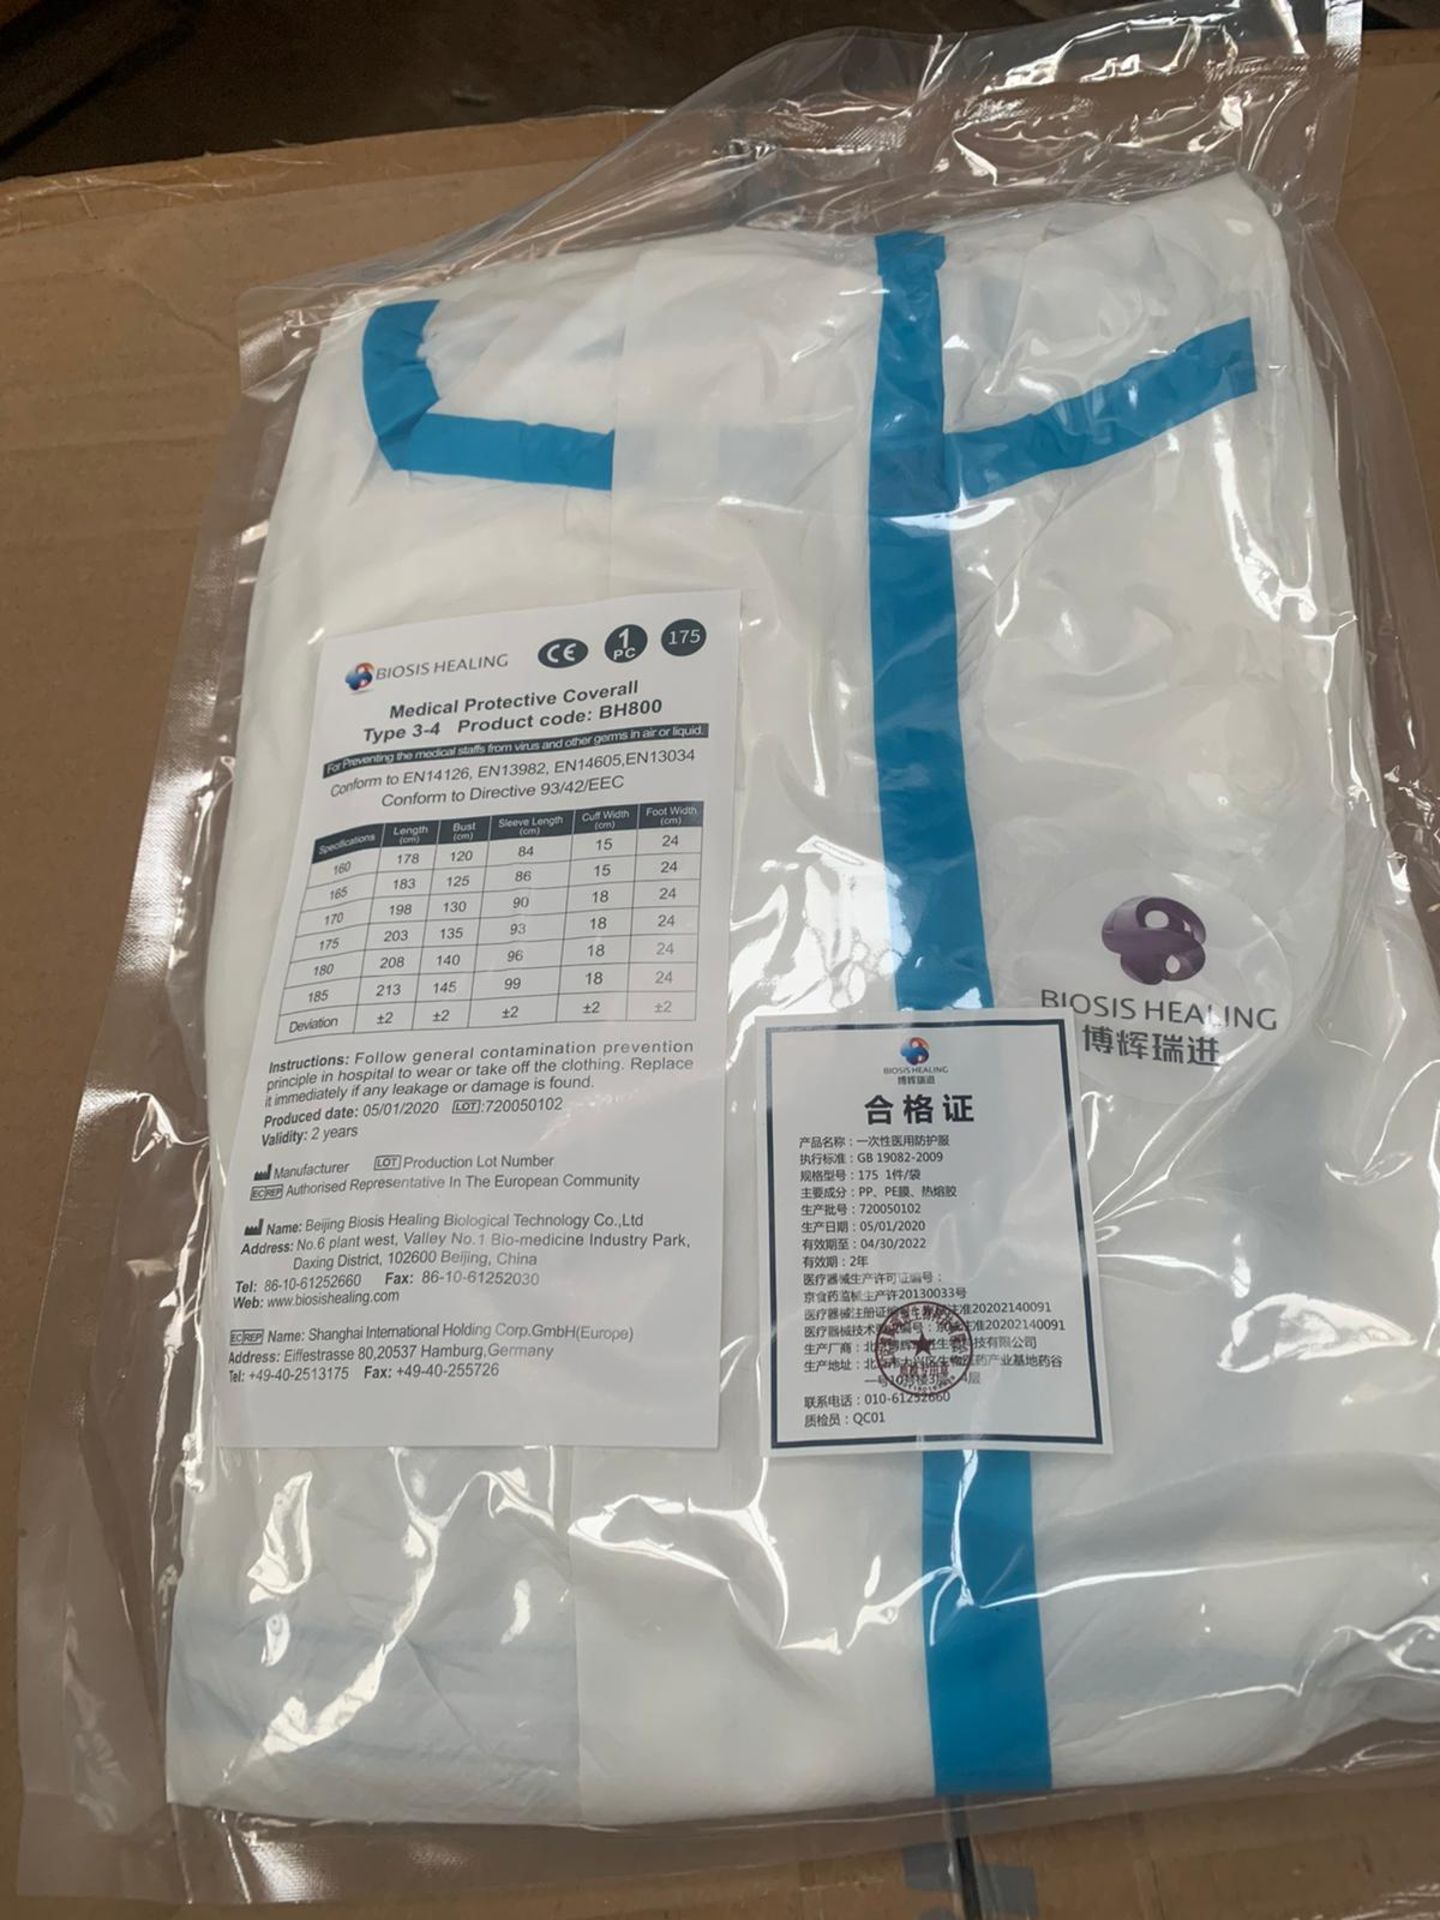 MEDICAL PROTECTIVE COVERALL TYPE 3-4 (PPE) (250 PCS)